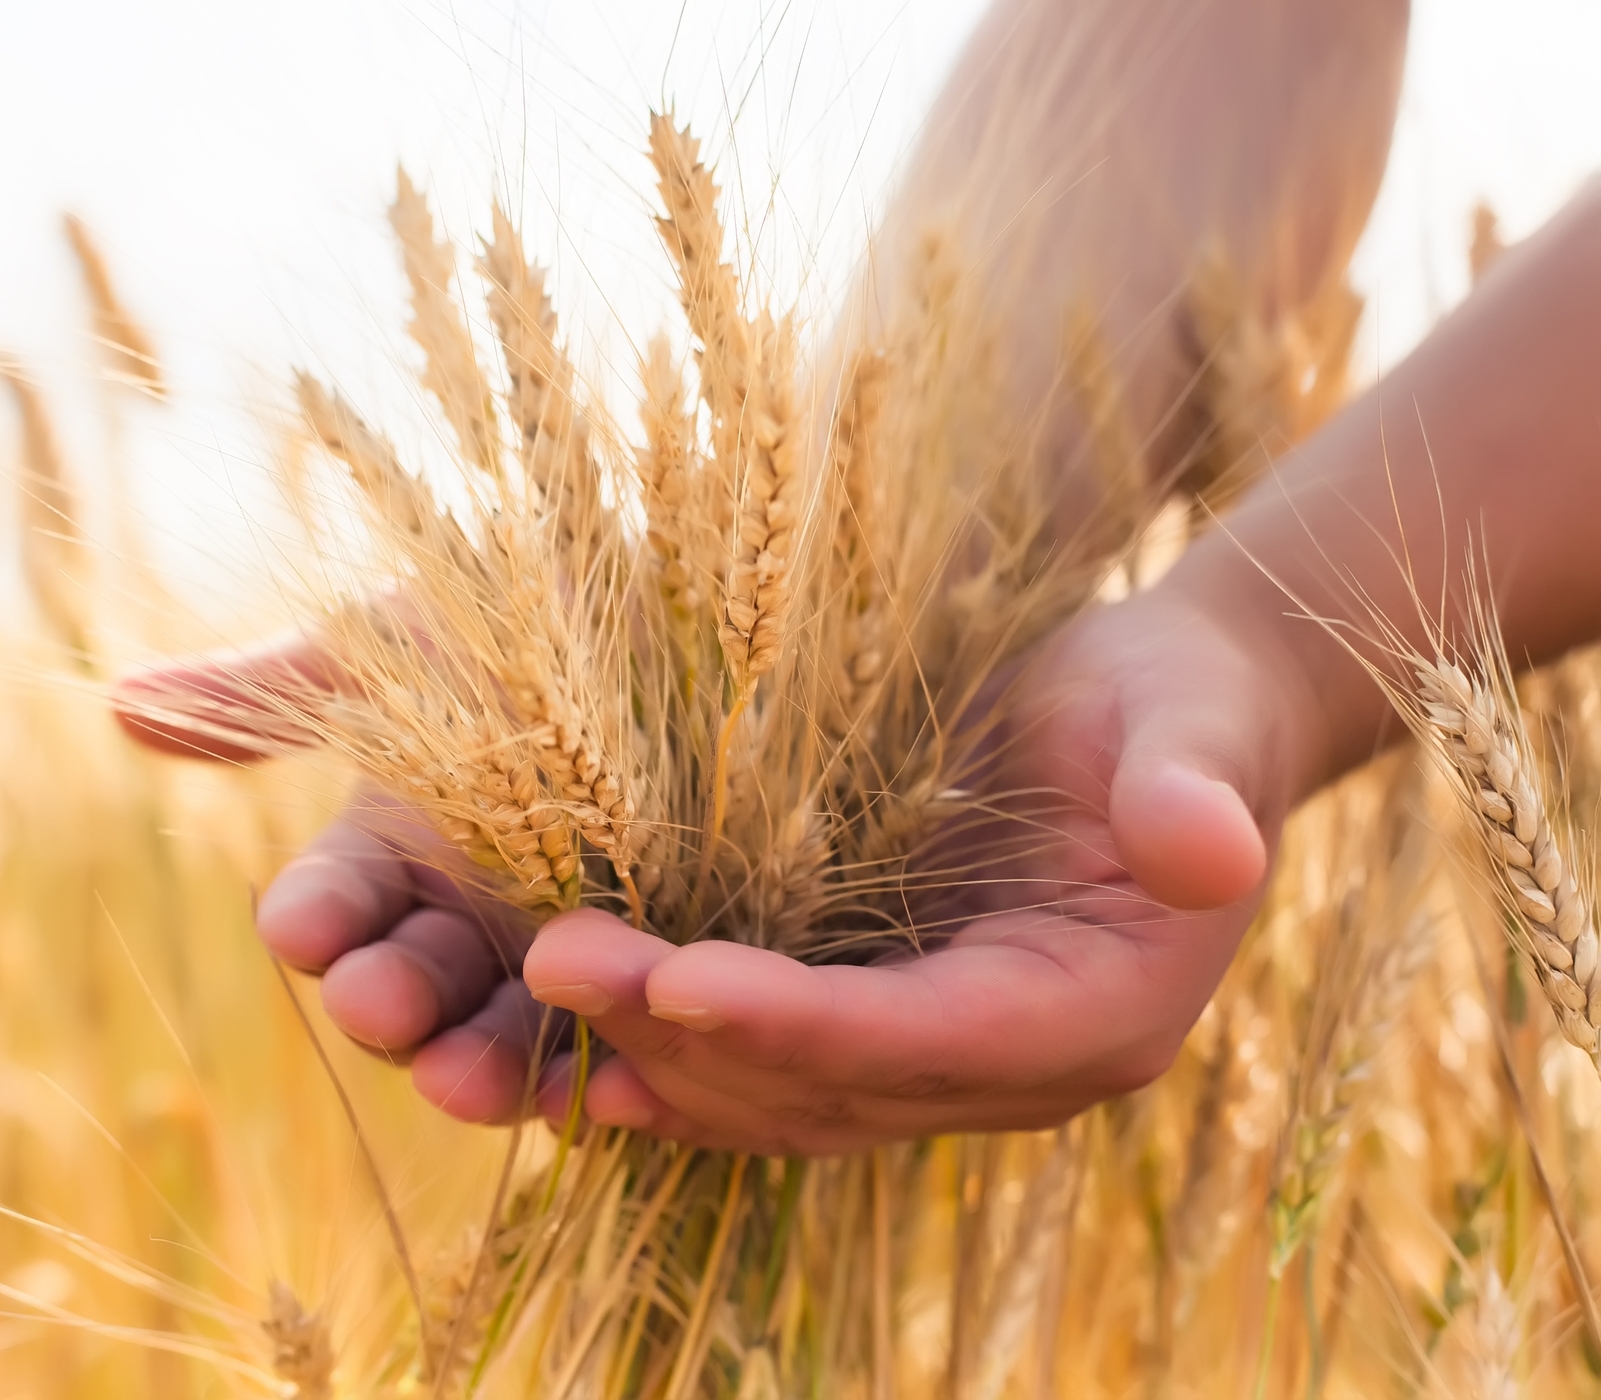 Christian Harvest Church - Wheat In Hand (Image)